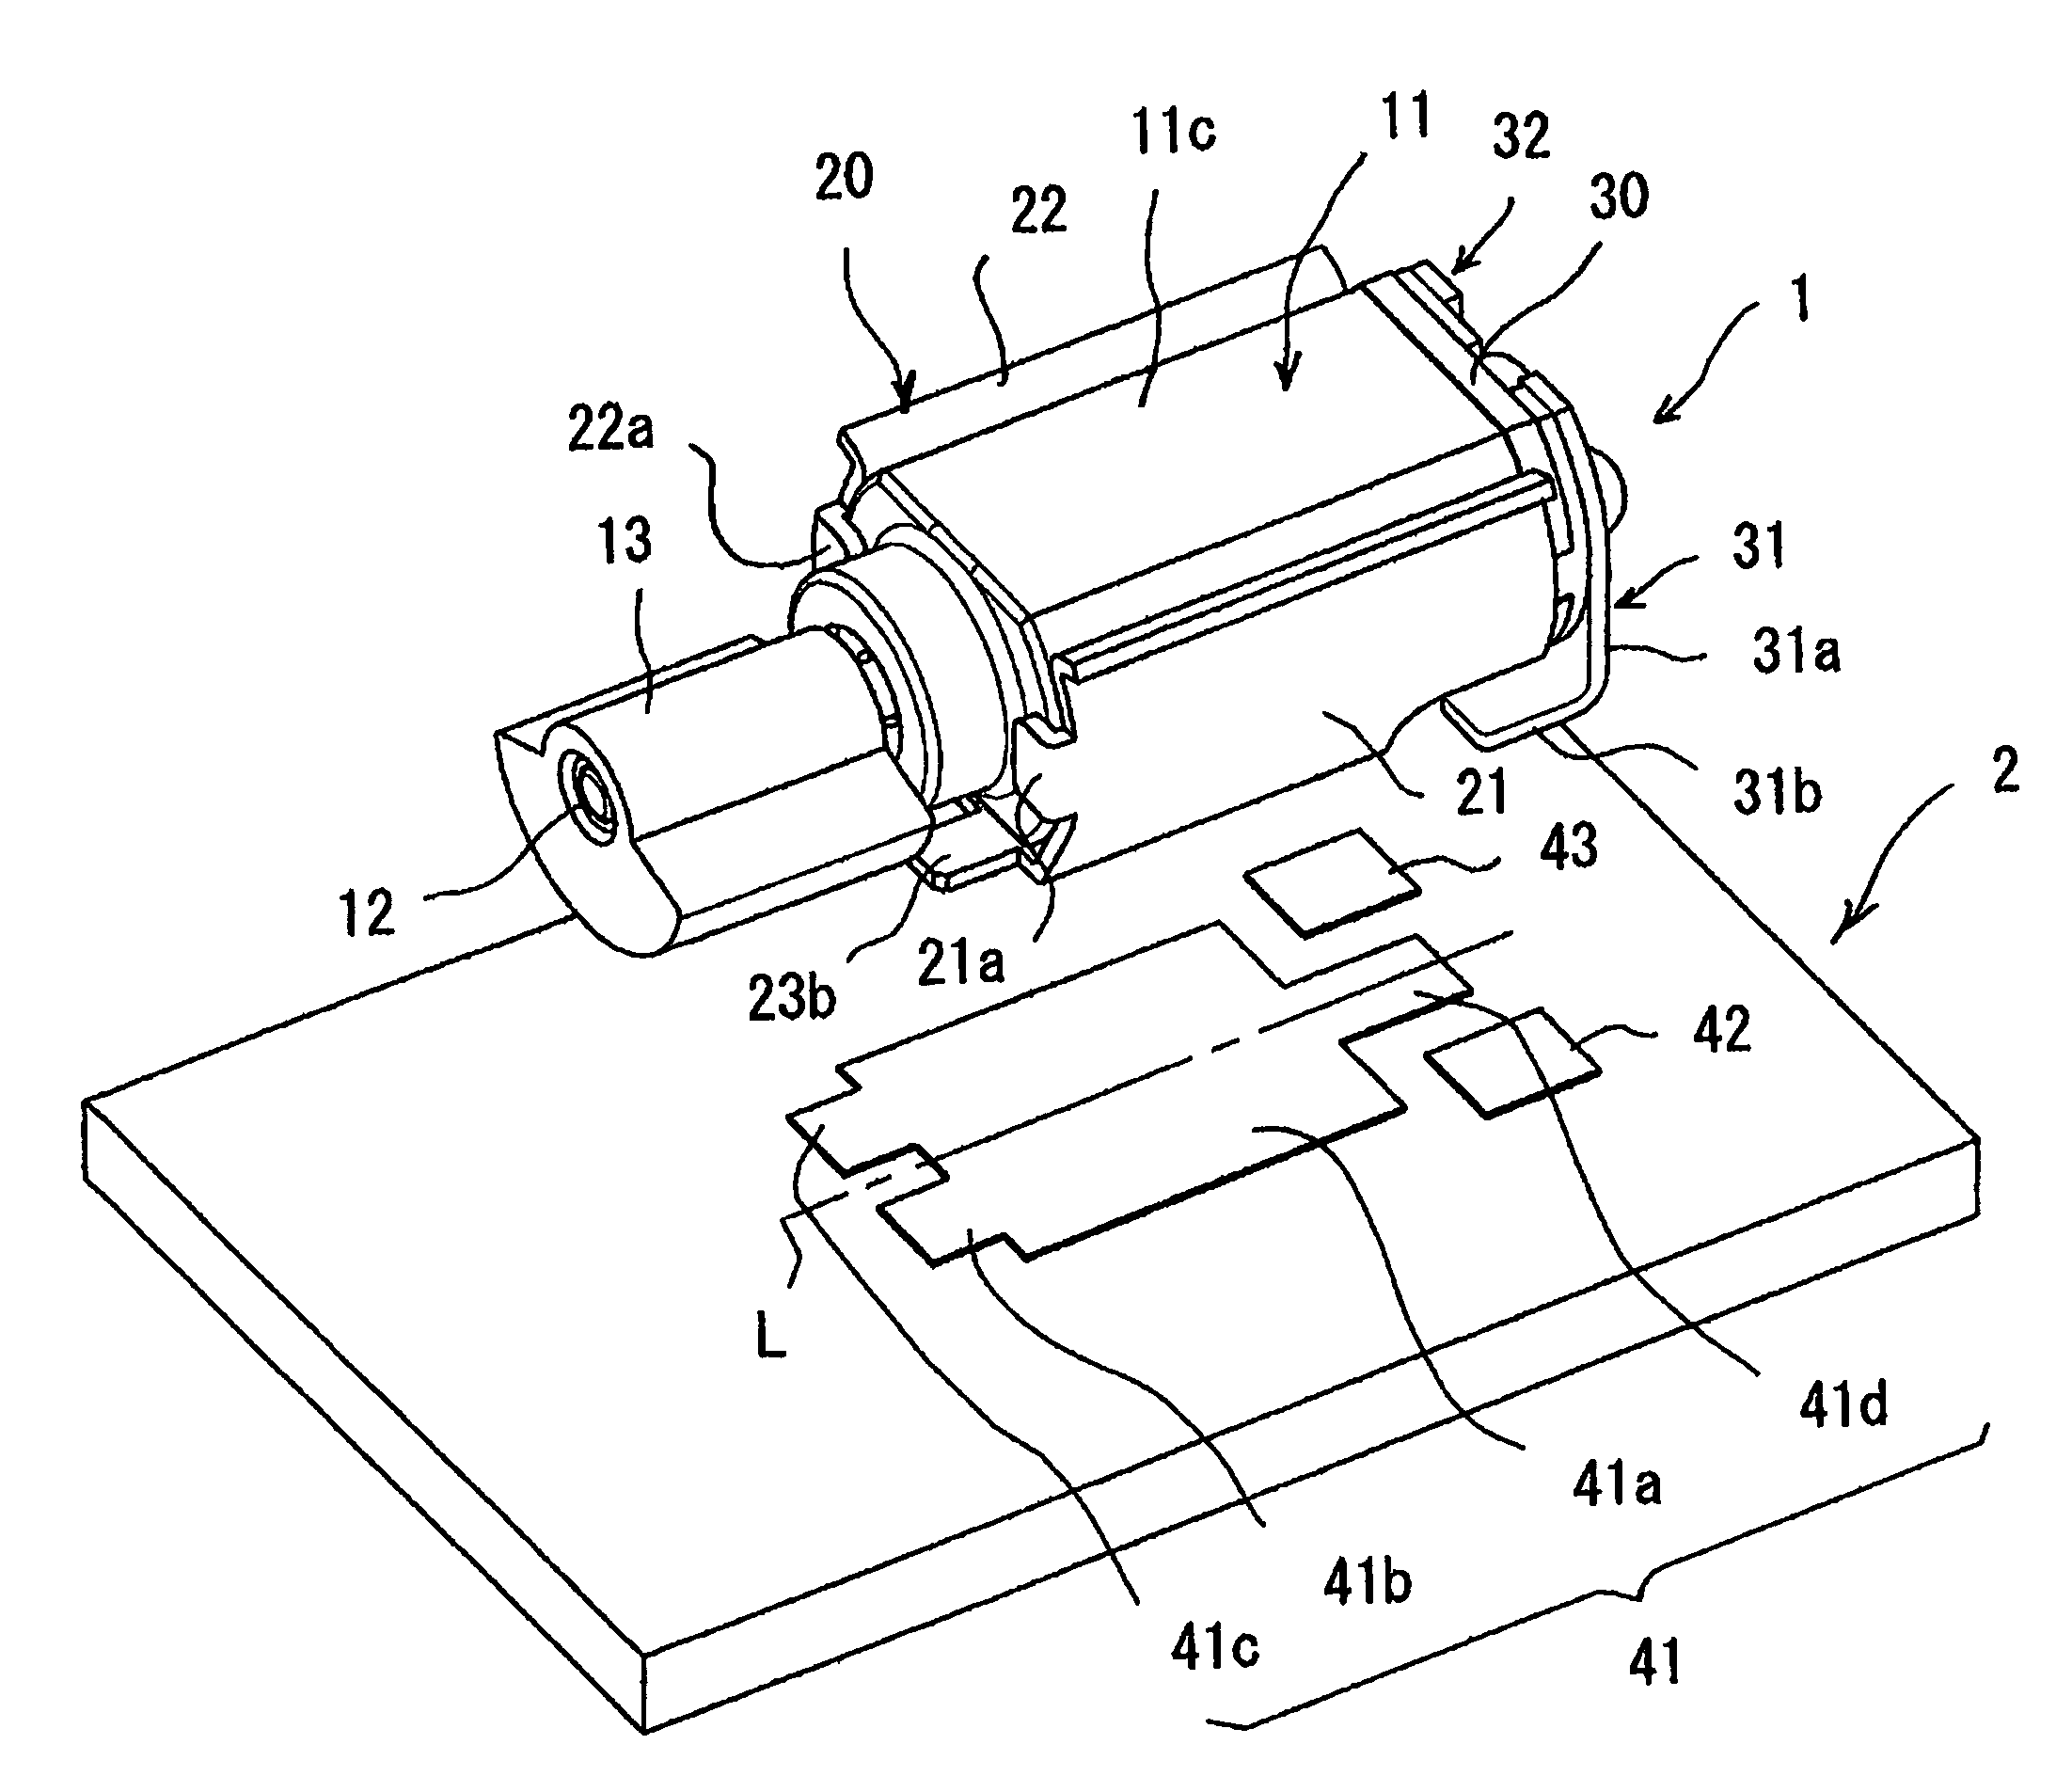 Board mounted structure of vibration motor